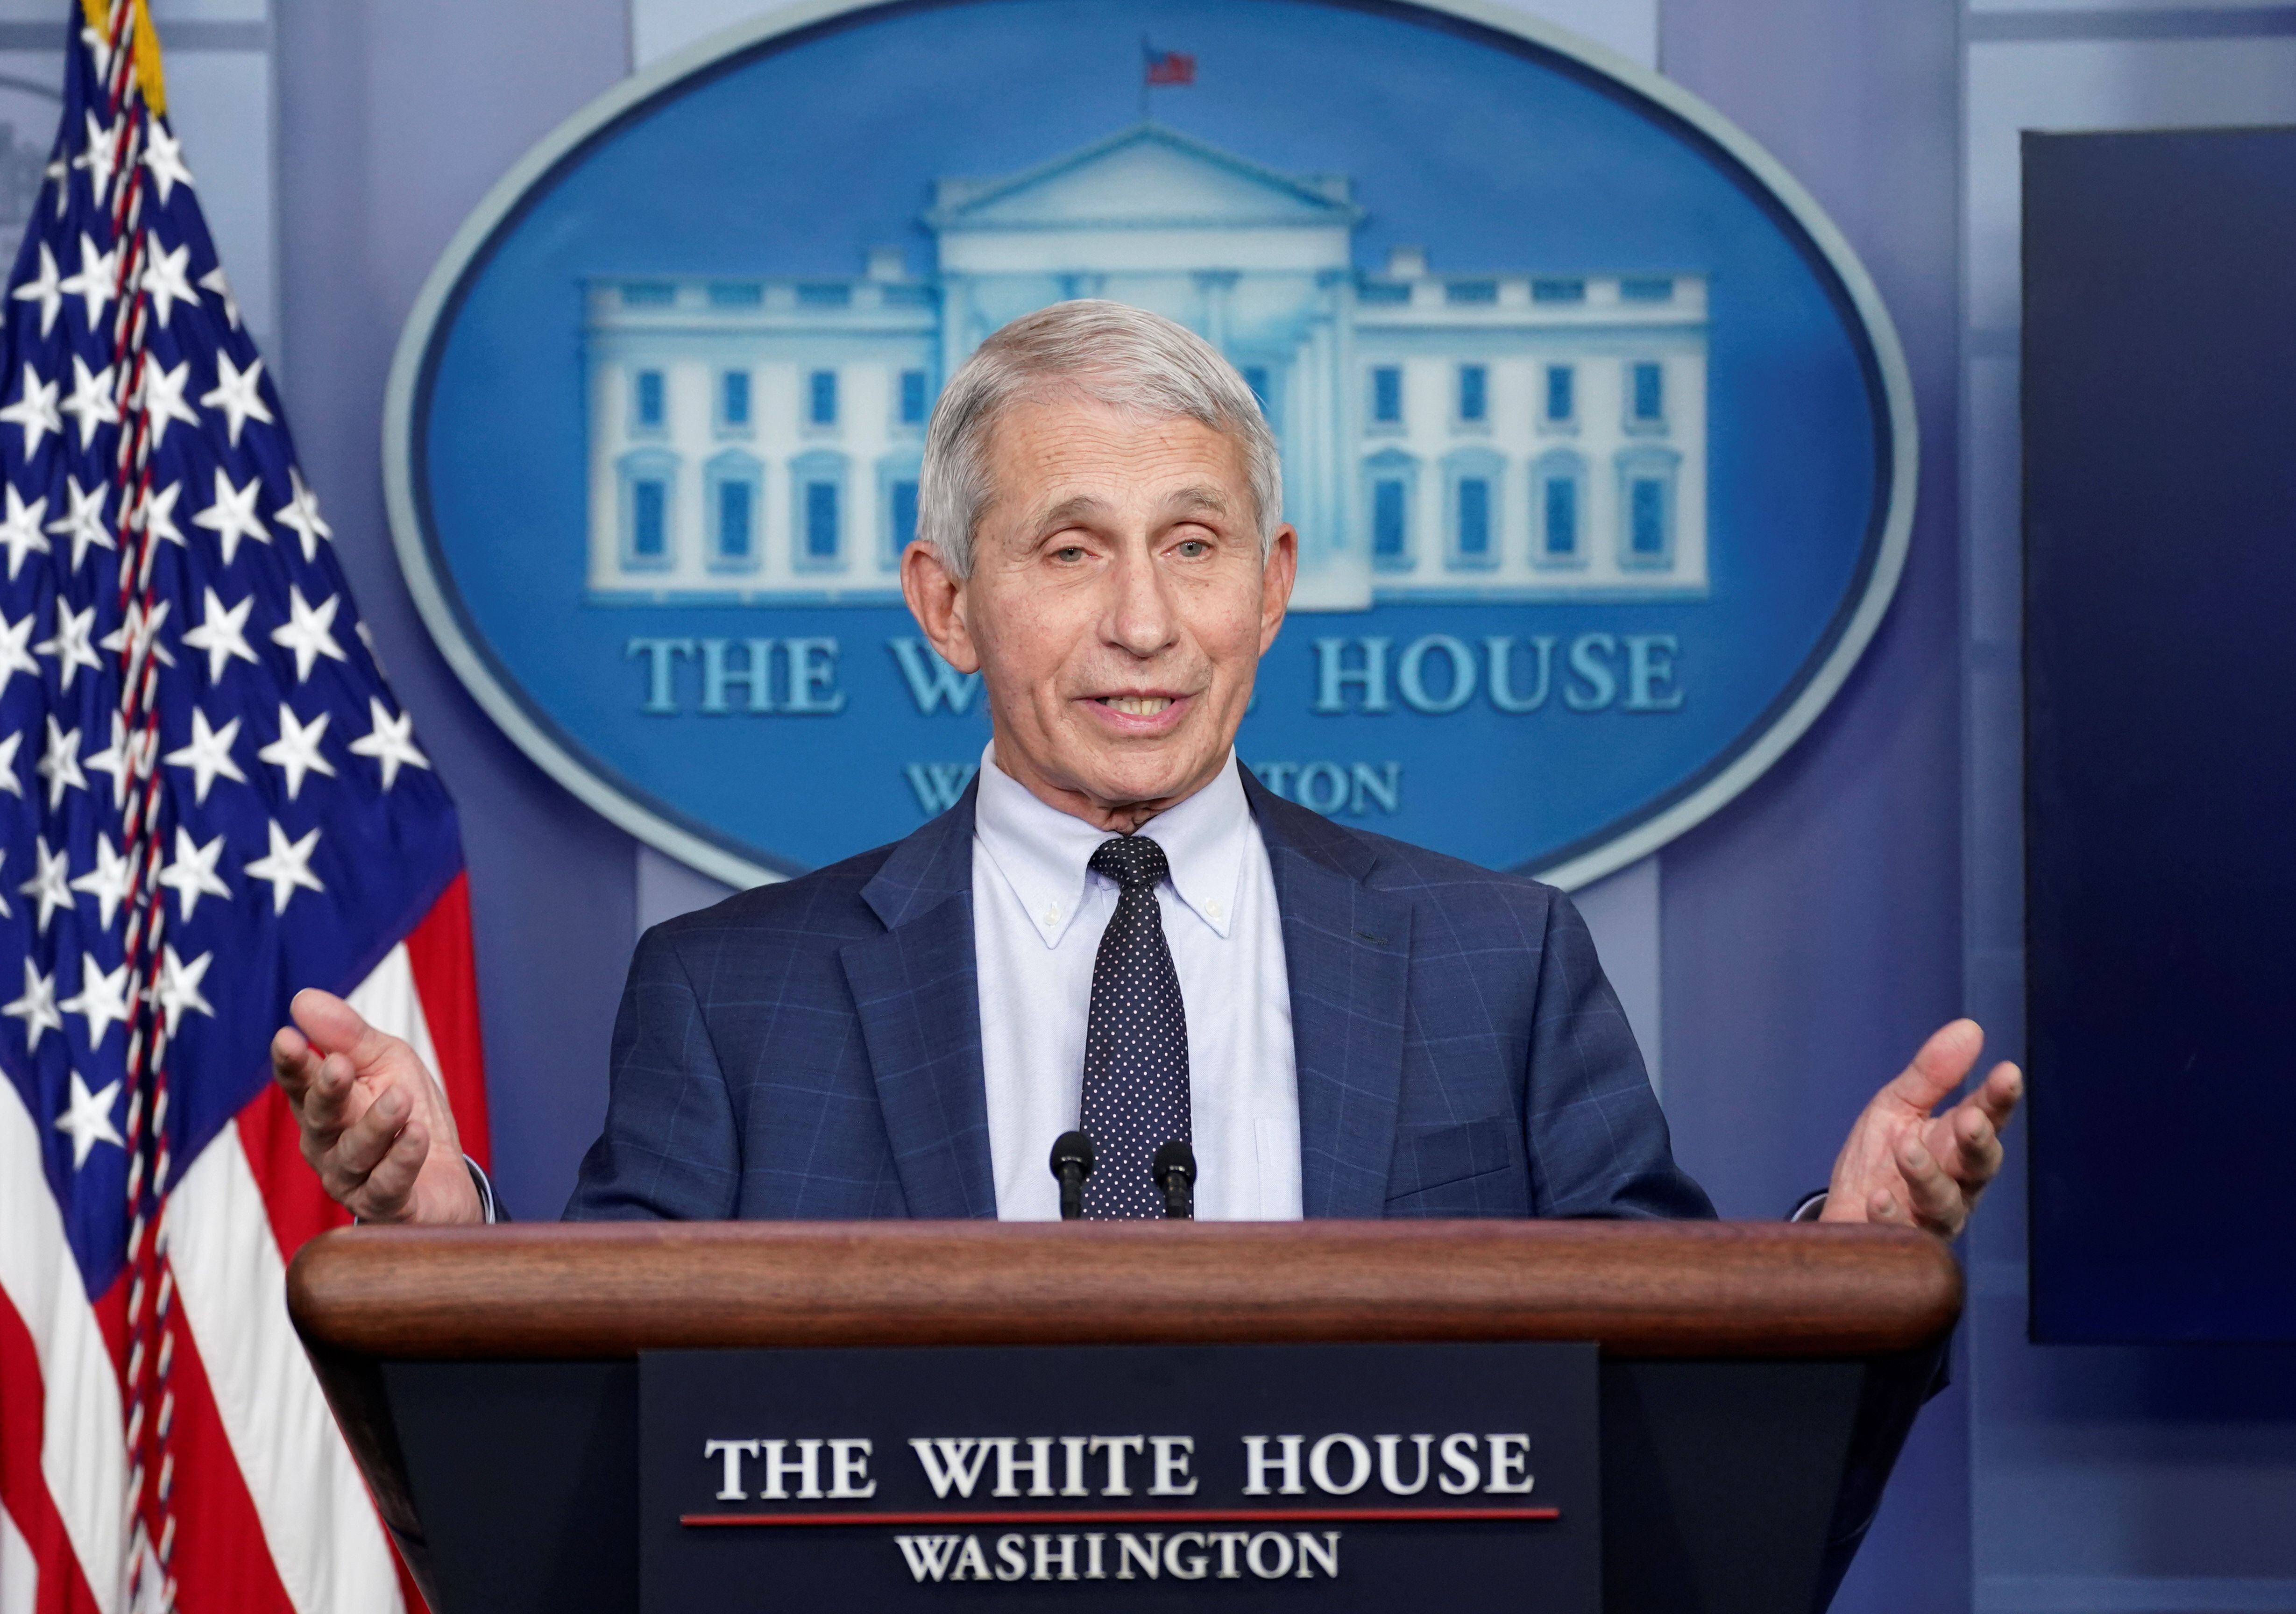 Dr. Anthony Fauci speaks about the Omicron coronavirus variant during a press briefing at the White House in Washington, U.S., December 1, 2021. REUTERS/Kevin Lamarque